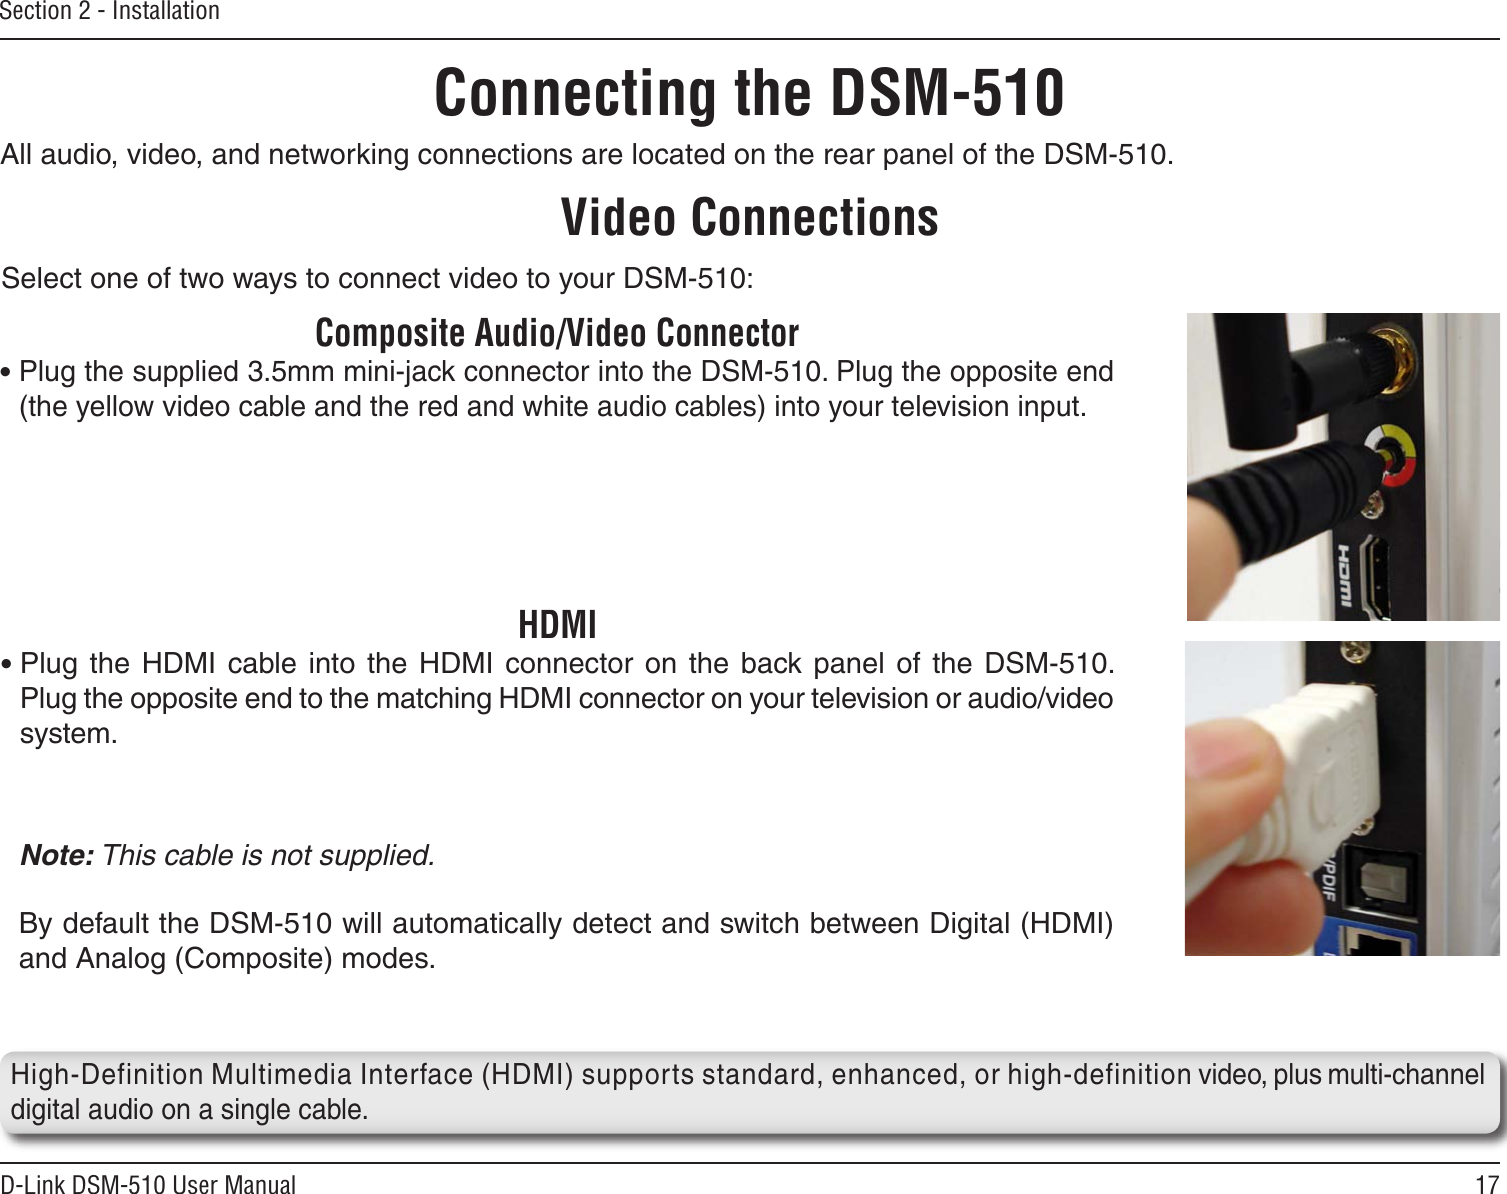 17D-Link DSM-510 User ManualSection 2 - InstallationAll audio, video, and networking connections are located on the rear panel of the DSM-510. Composite Audio/Video Connector• Plug the supplied 3.5mm mini-jack connector into the DSM-510. Plug the opposite end (the yellow video cable and the red and white audio cables) into your television input.Video ConnectionsSelect one of two ways to connect video to your DSM-510:Connecting the DSM-510HDMI• Plug  the  HDMI  cable into the  HDMI  connector  on  the  back panel of  the  DSM-510. Plug the opposite end to the matching HDMI connector on your television or audio/video system. Note: This cable is not supplied.   By default the DSM-510 will automatically detect and switch between Digital (HDMI) and Analog (Composite) modes.   High-Definition Multimedia Interface (HDMI) supports standard, enhanced, or high-definition video, plus multi-channel digital audio on a single cable.